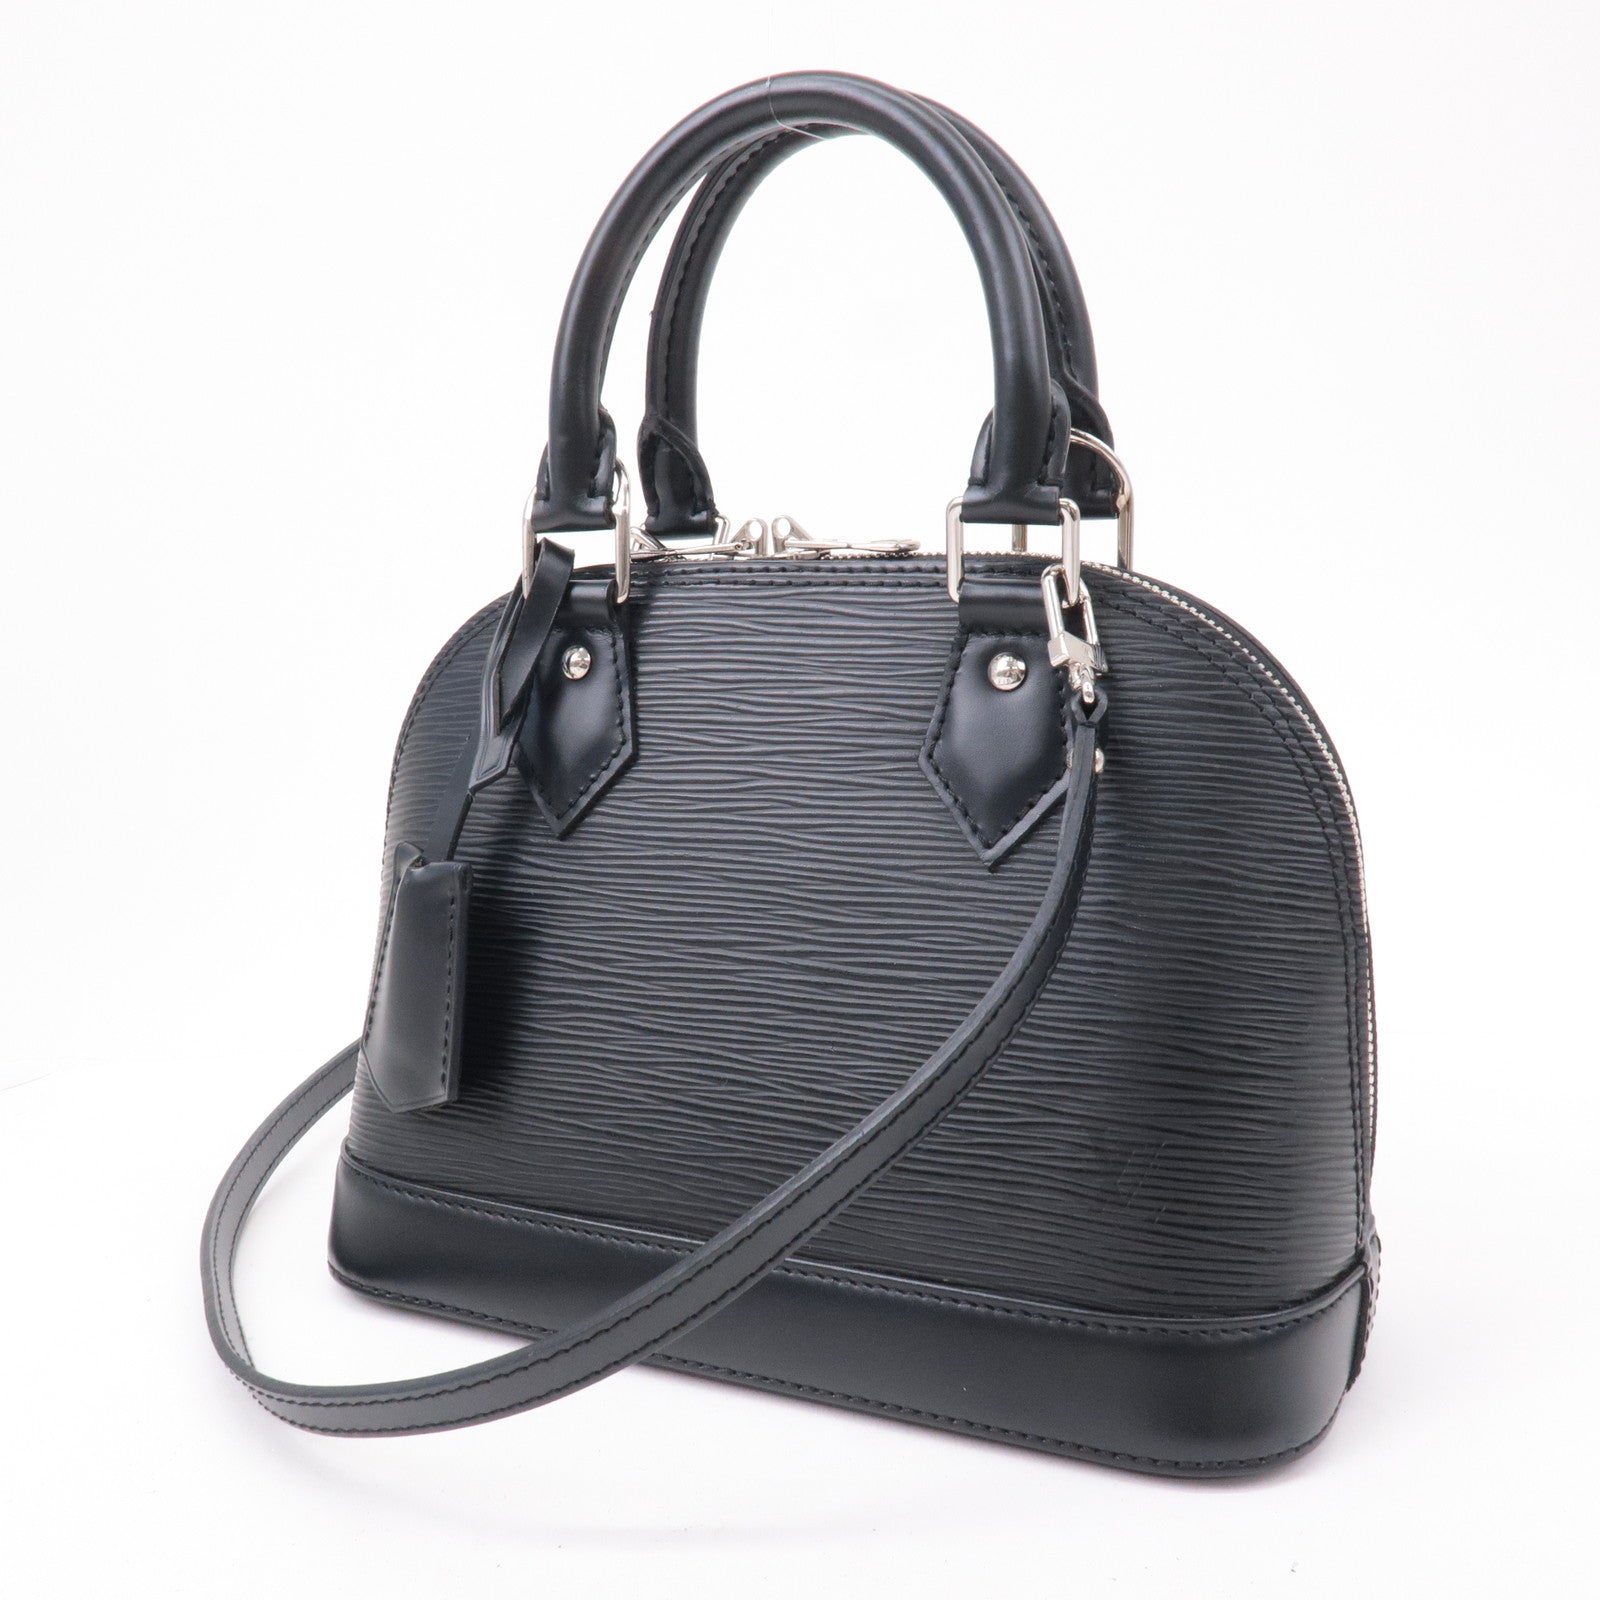 LOUIS VUITTON - Alma MM bag in epi leather and black …